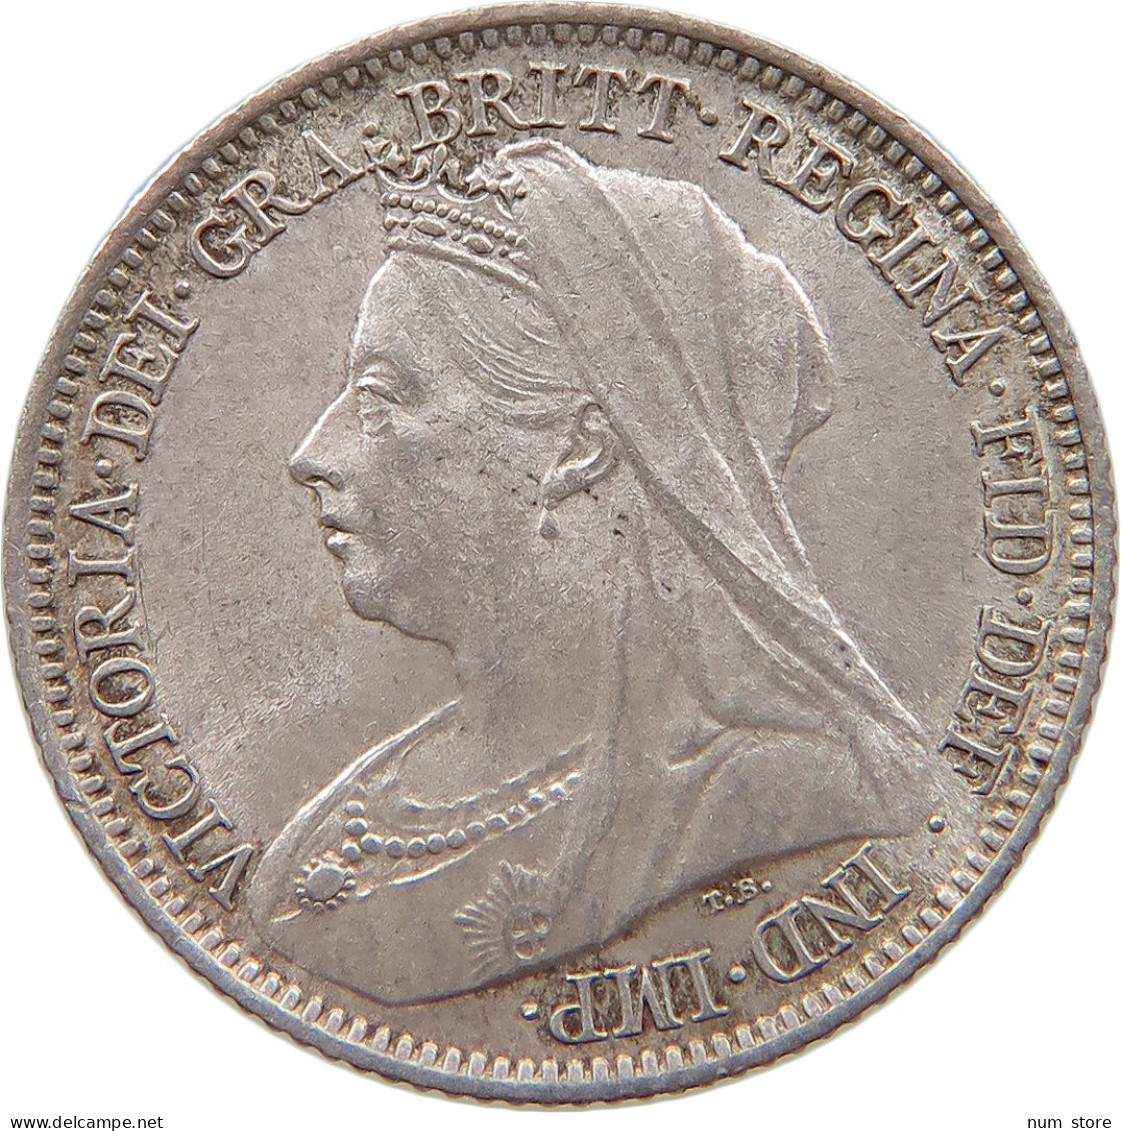 GREAT BRITAIN SIXPENCE 1900 Victoria 1837-1901 #t115 0405 - H. 6 Pence